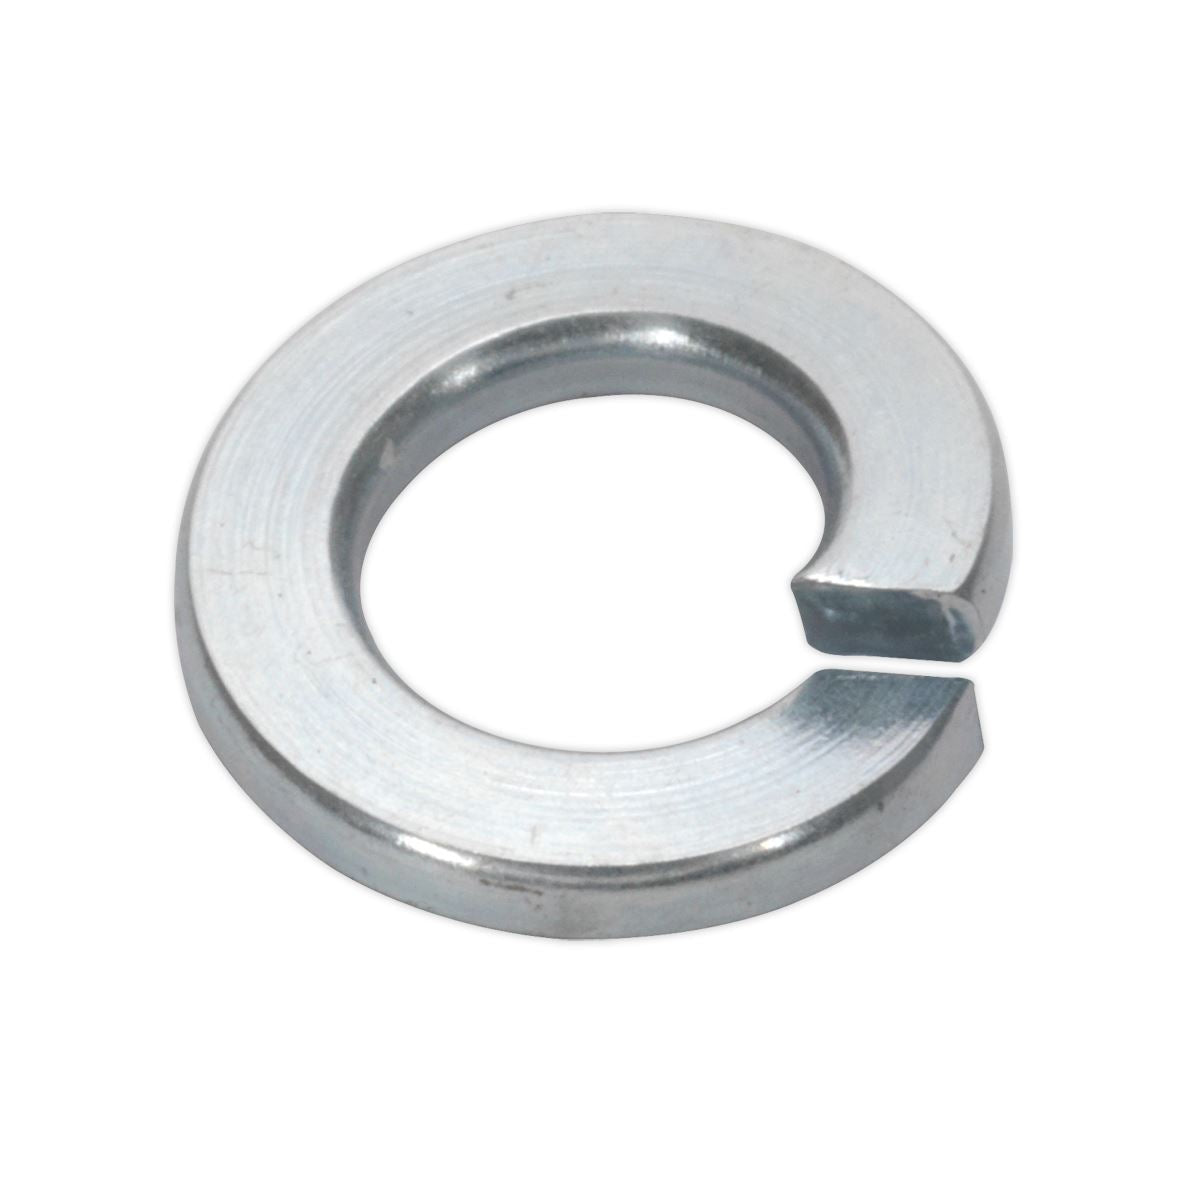 Sealey Spring Washer DIN 127B M6 Zinc Pack of 100